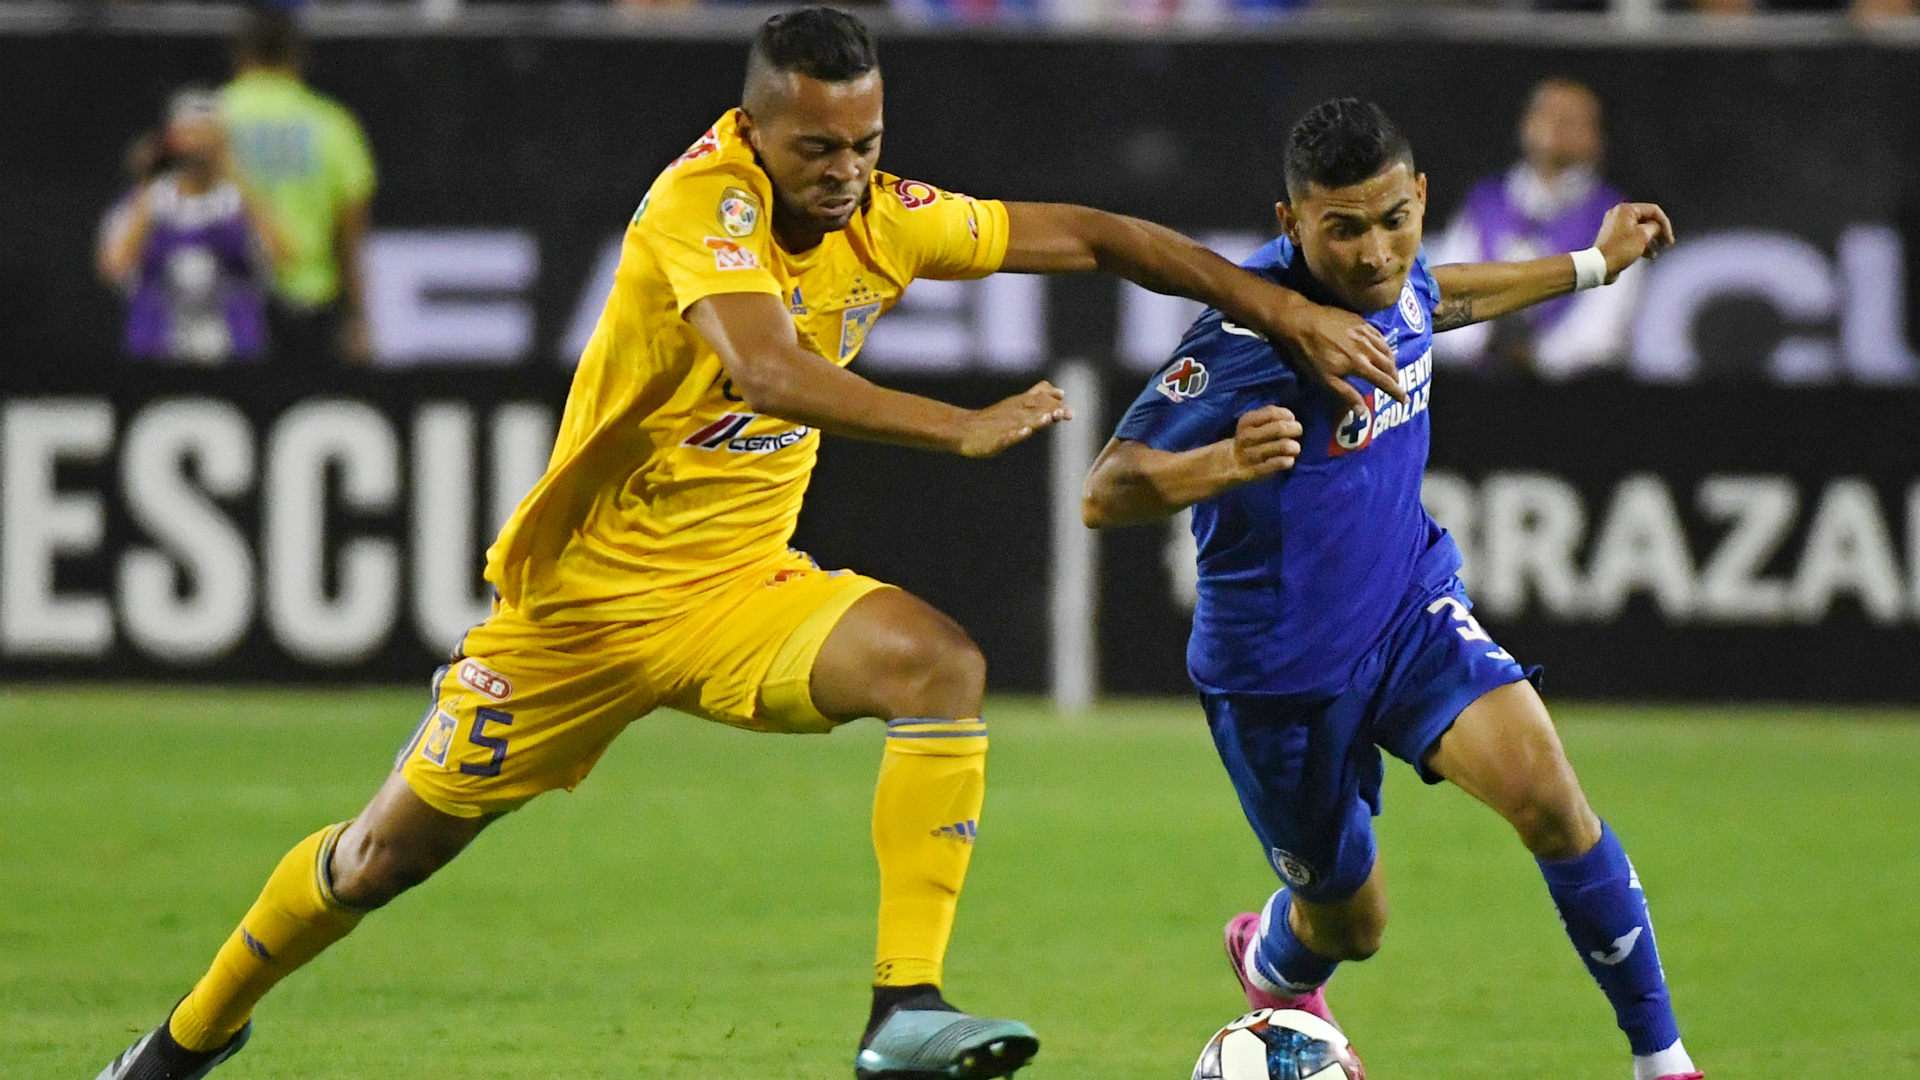 Cruz Azul were crowned champions of the inaugural Leagues Cup on Wednesday.